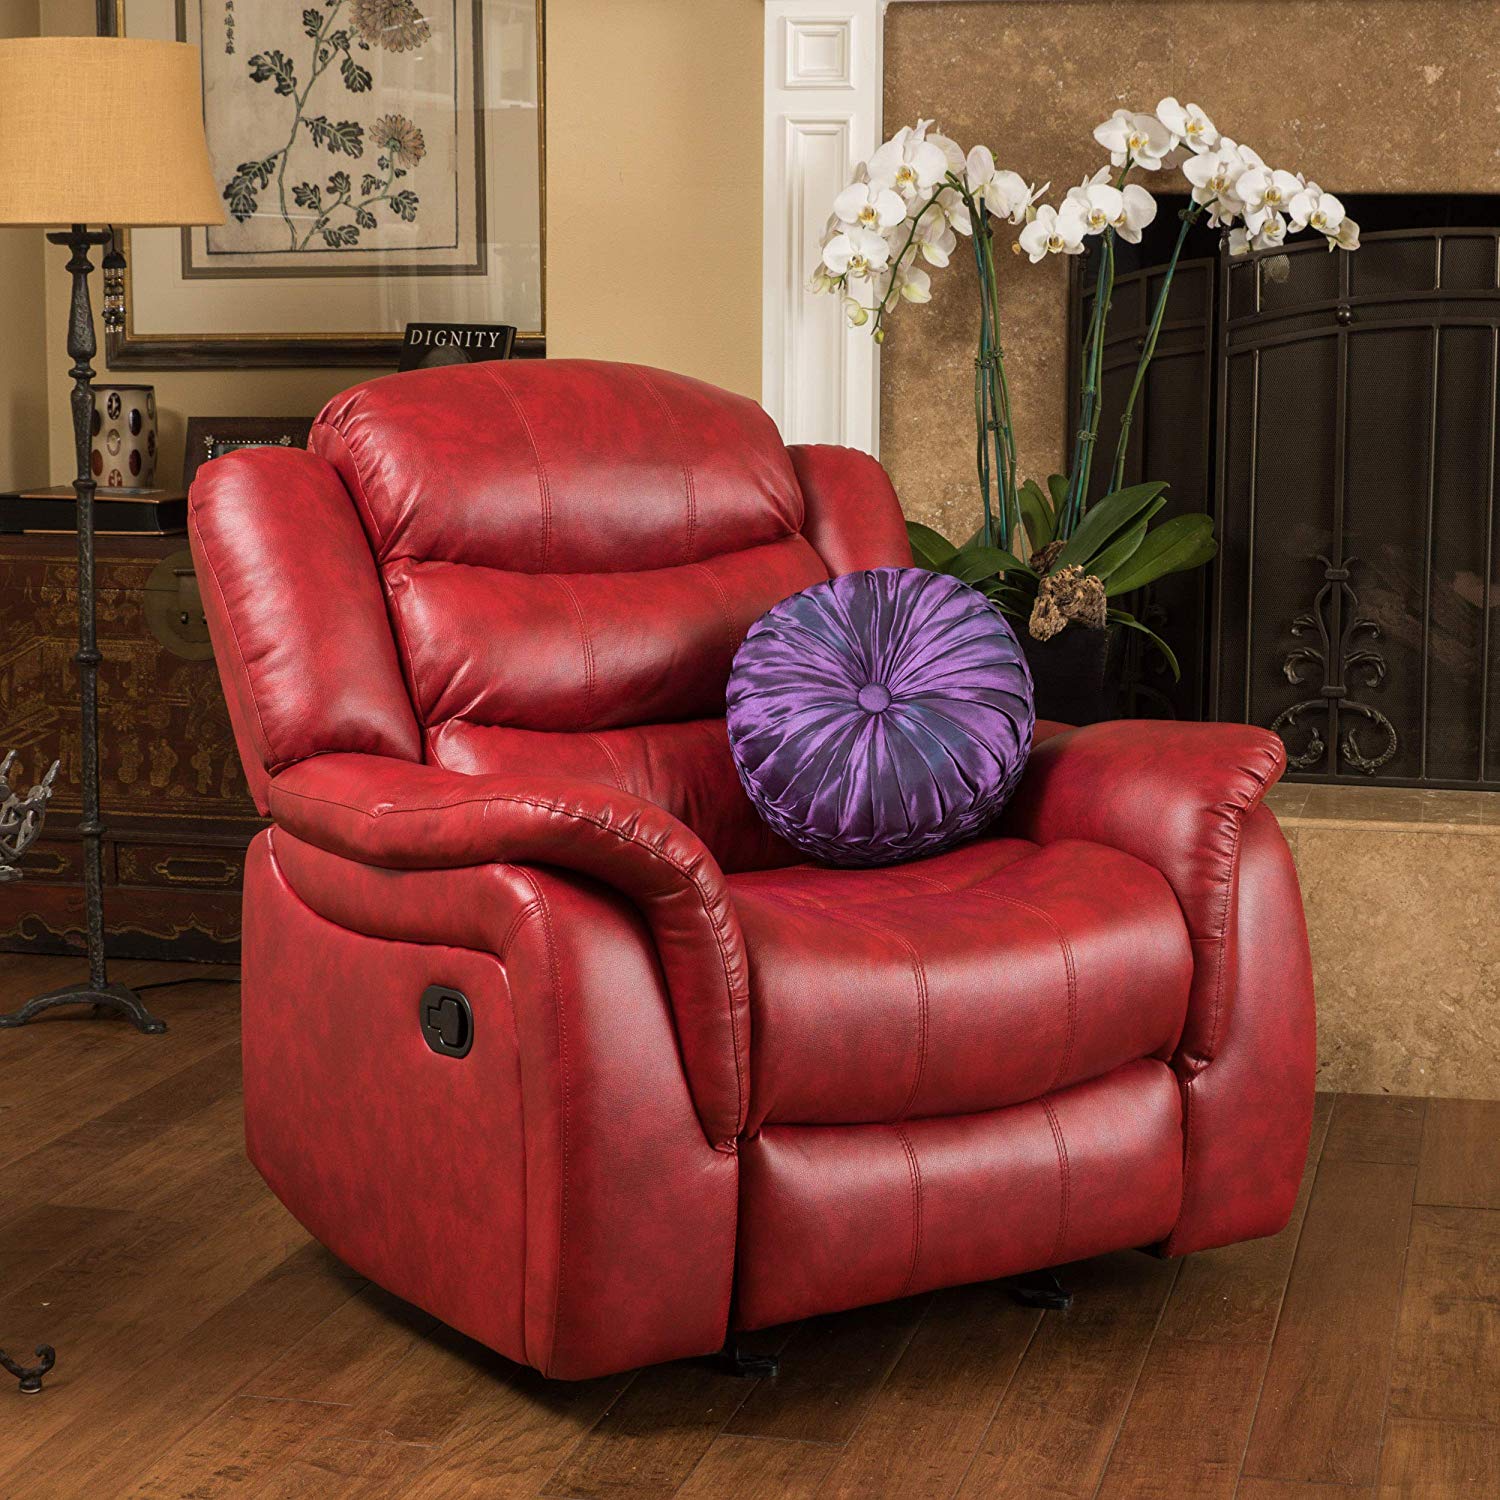 Top 10 Red Leather Recliner Chairs - 2020 Reviews & Guide ...